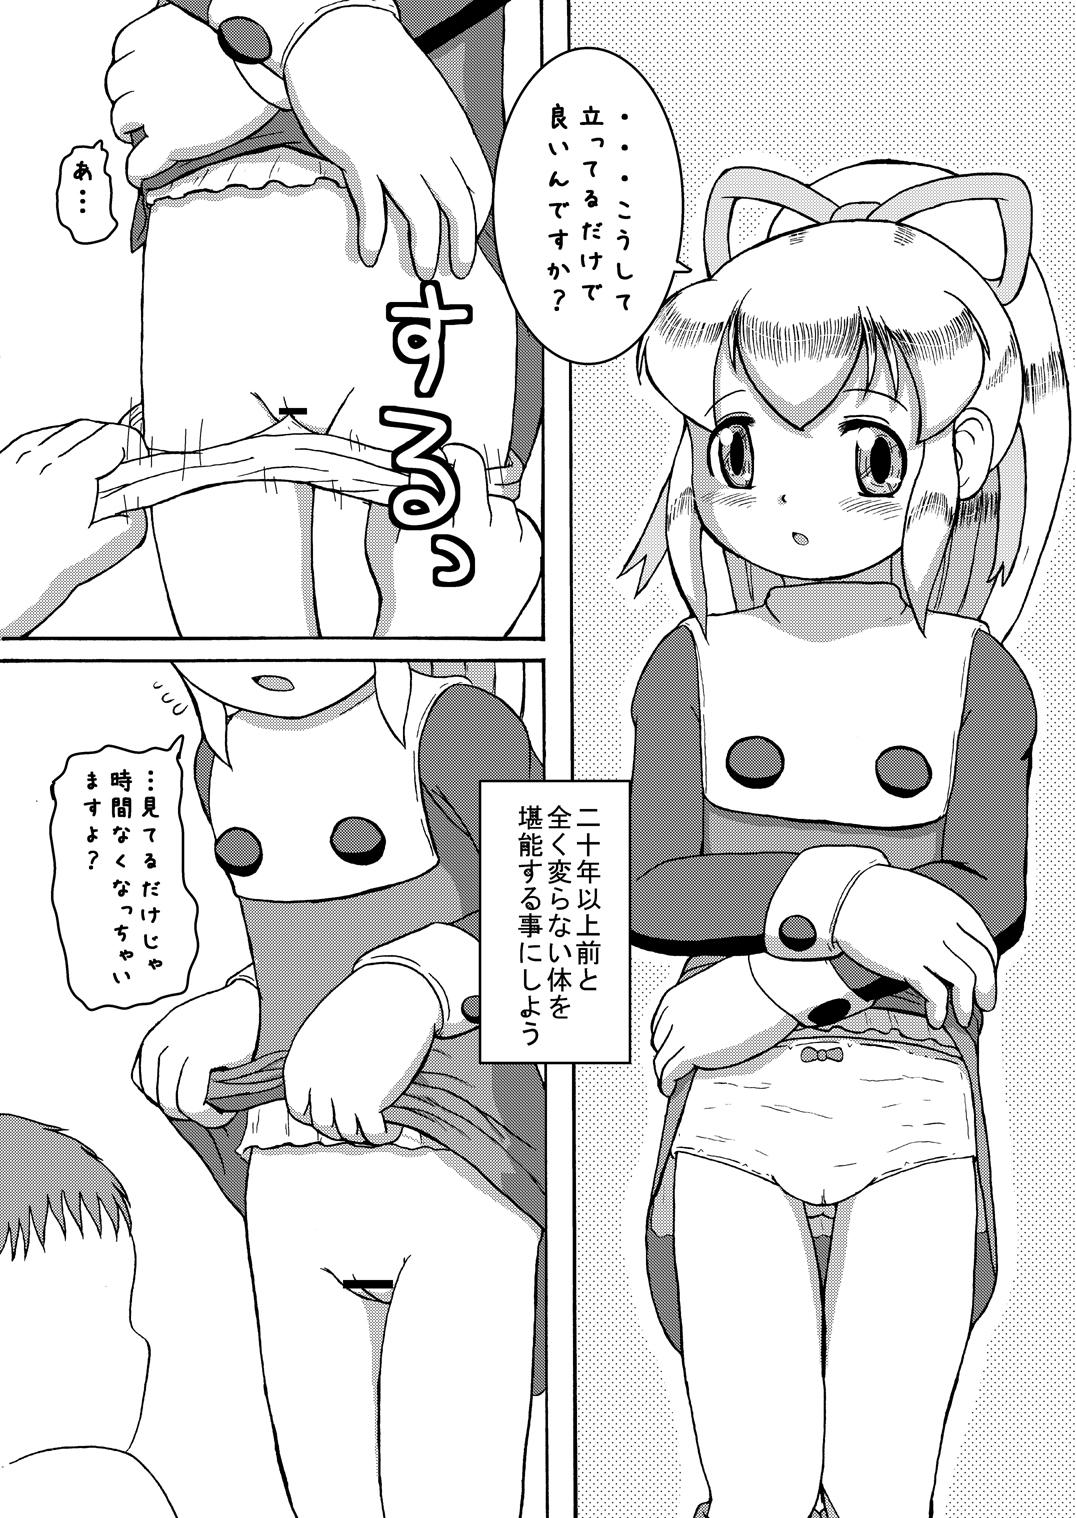 Gros Seins LoveRoLL+DDD - Megaman Cyberbots Cheating Wife - Page 3